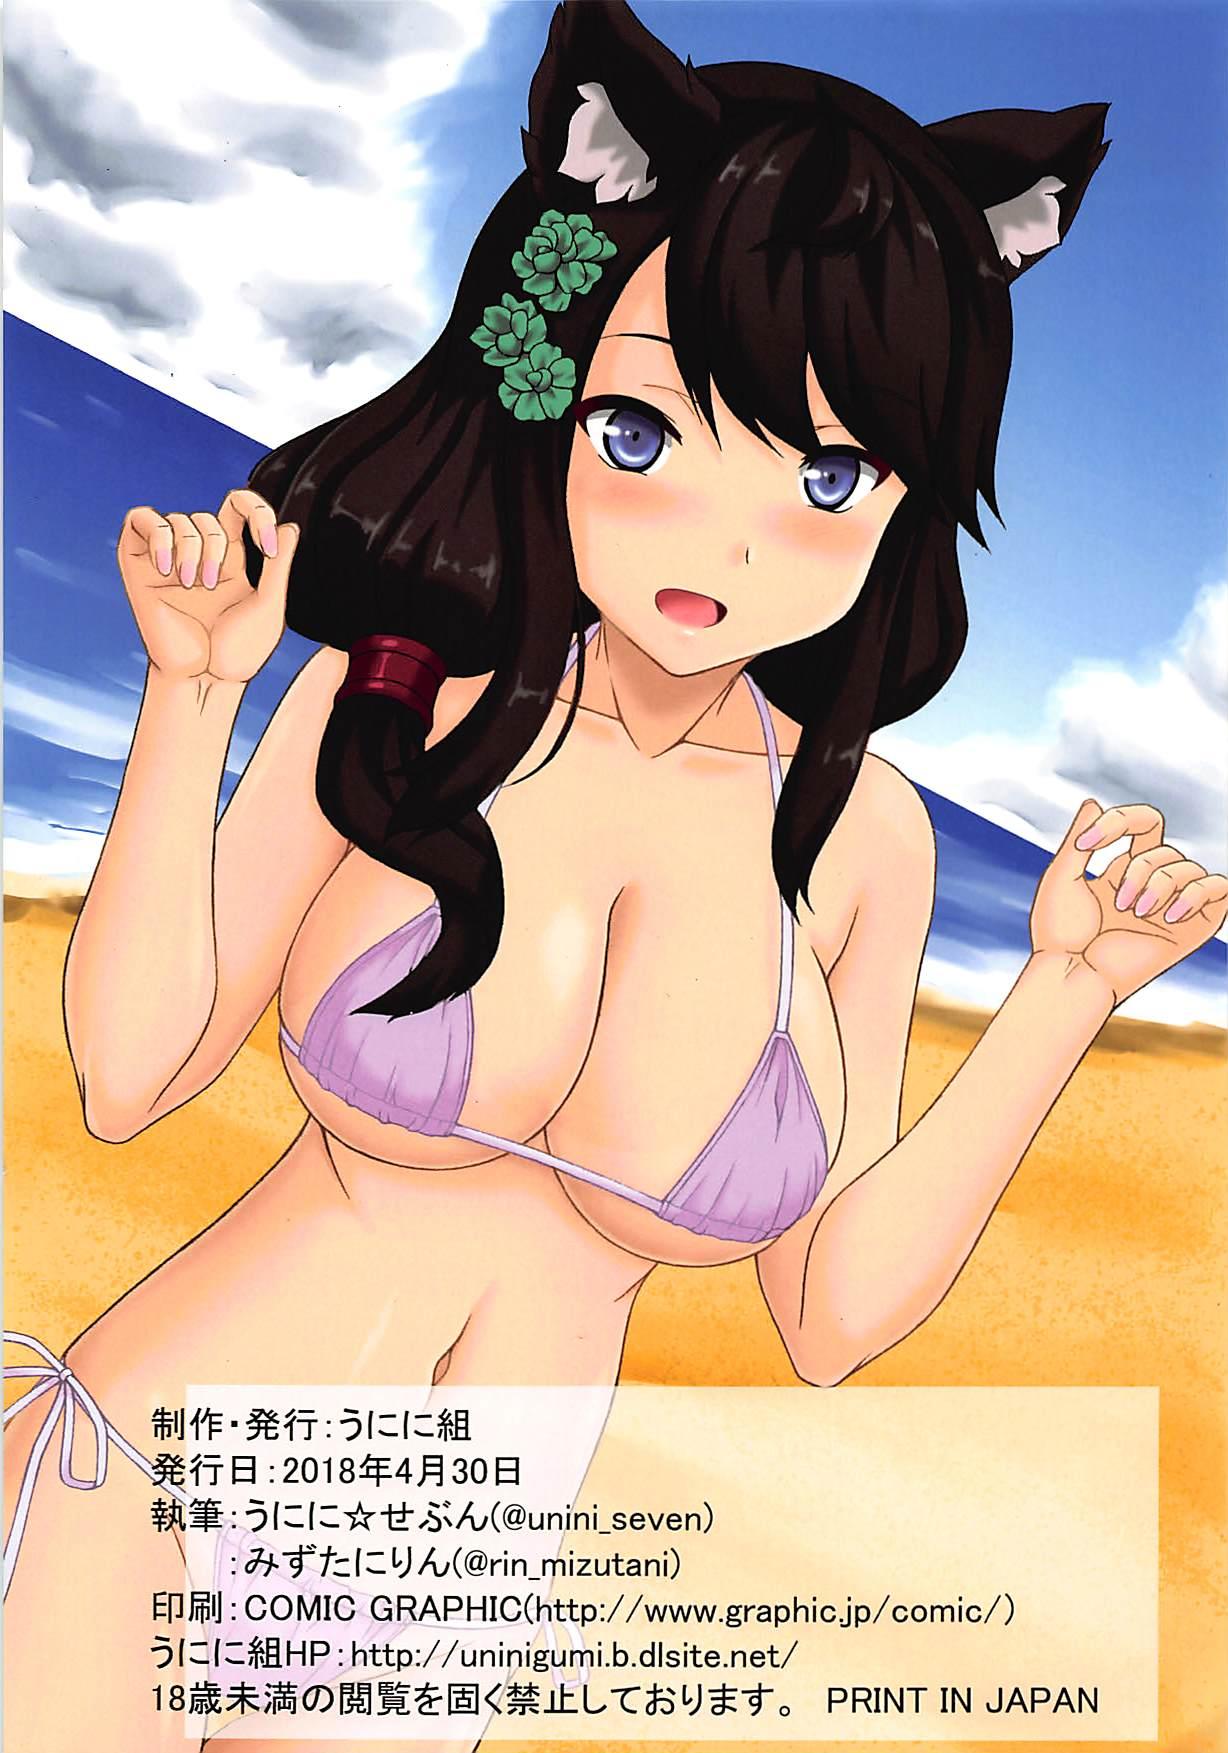 Pawg siquall chiin - Azur lane Brunettes - Page 11